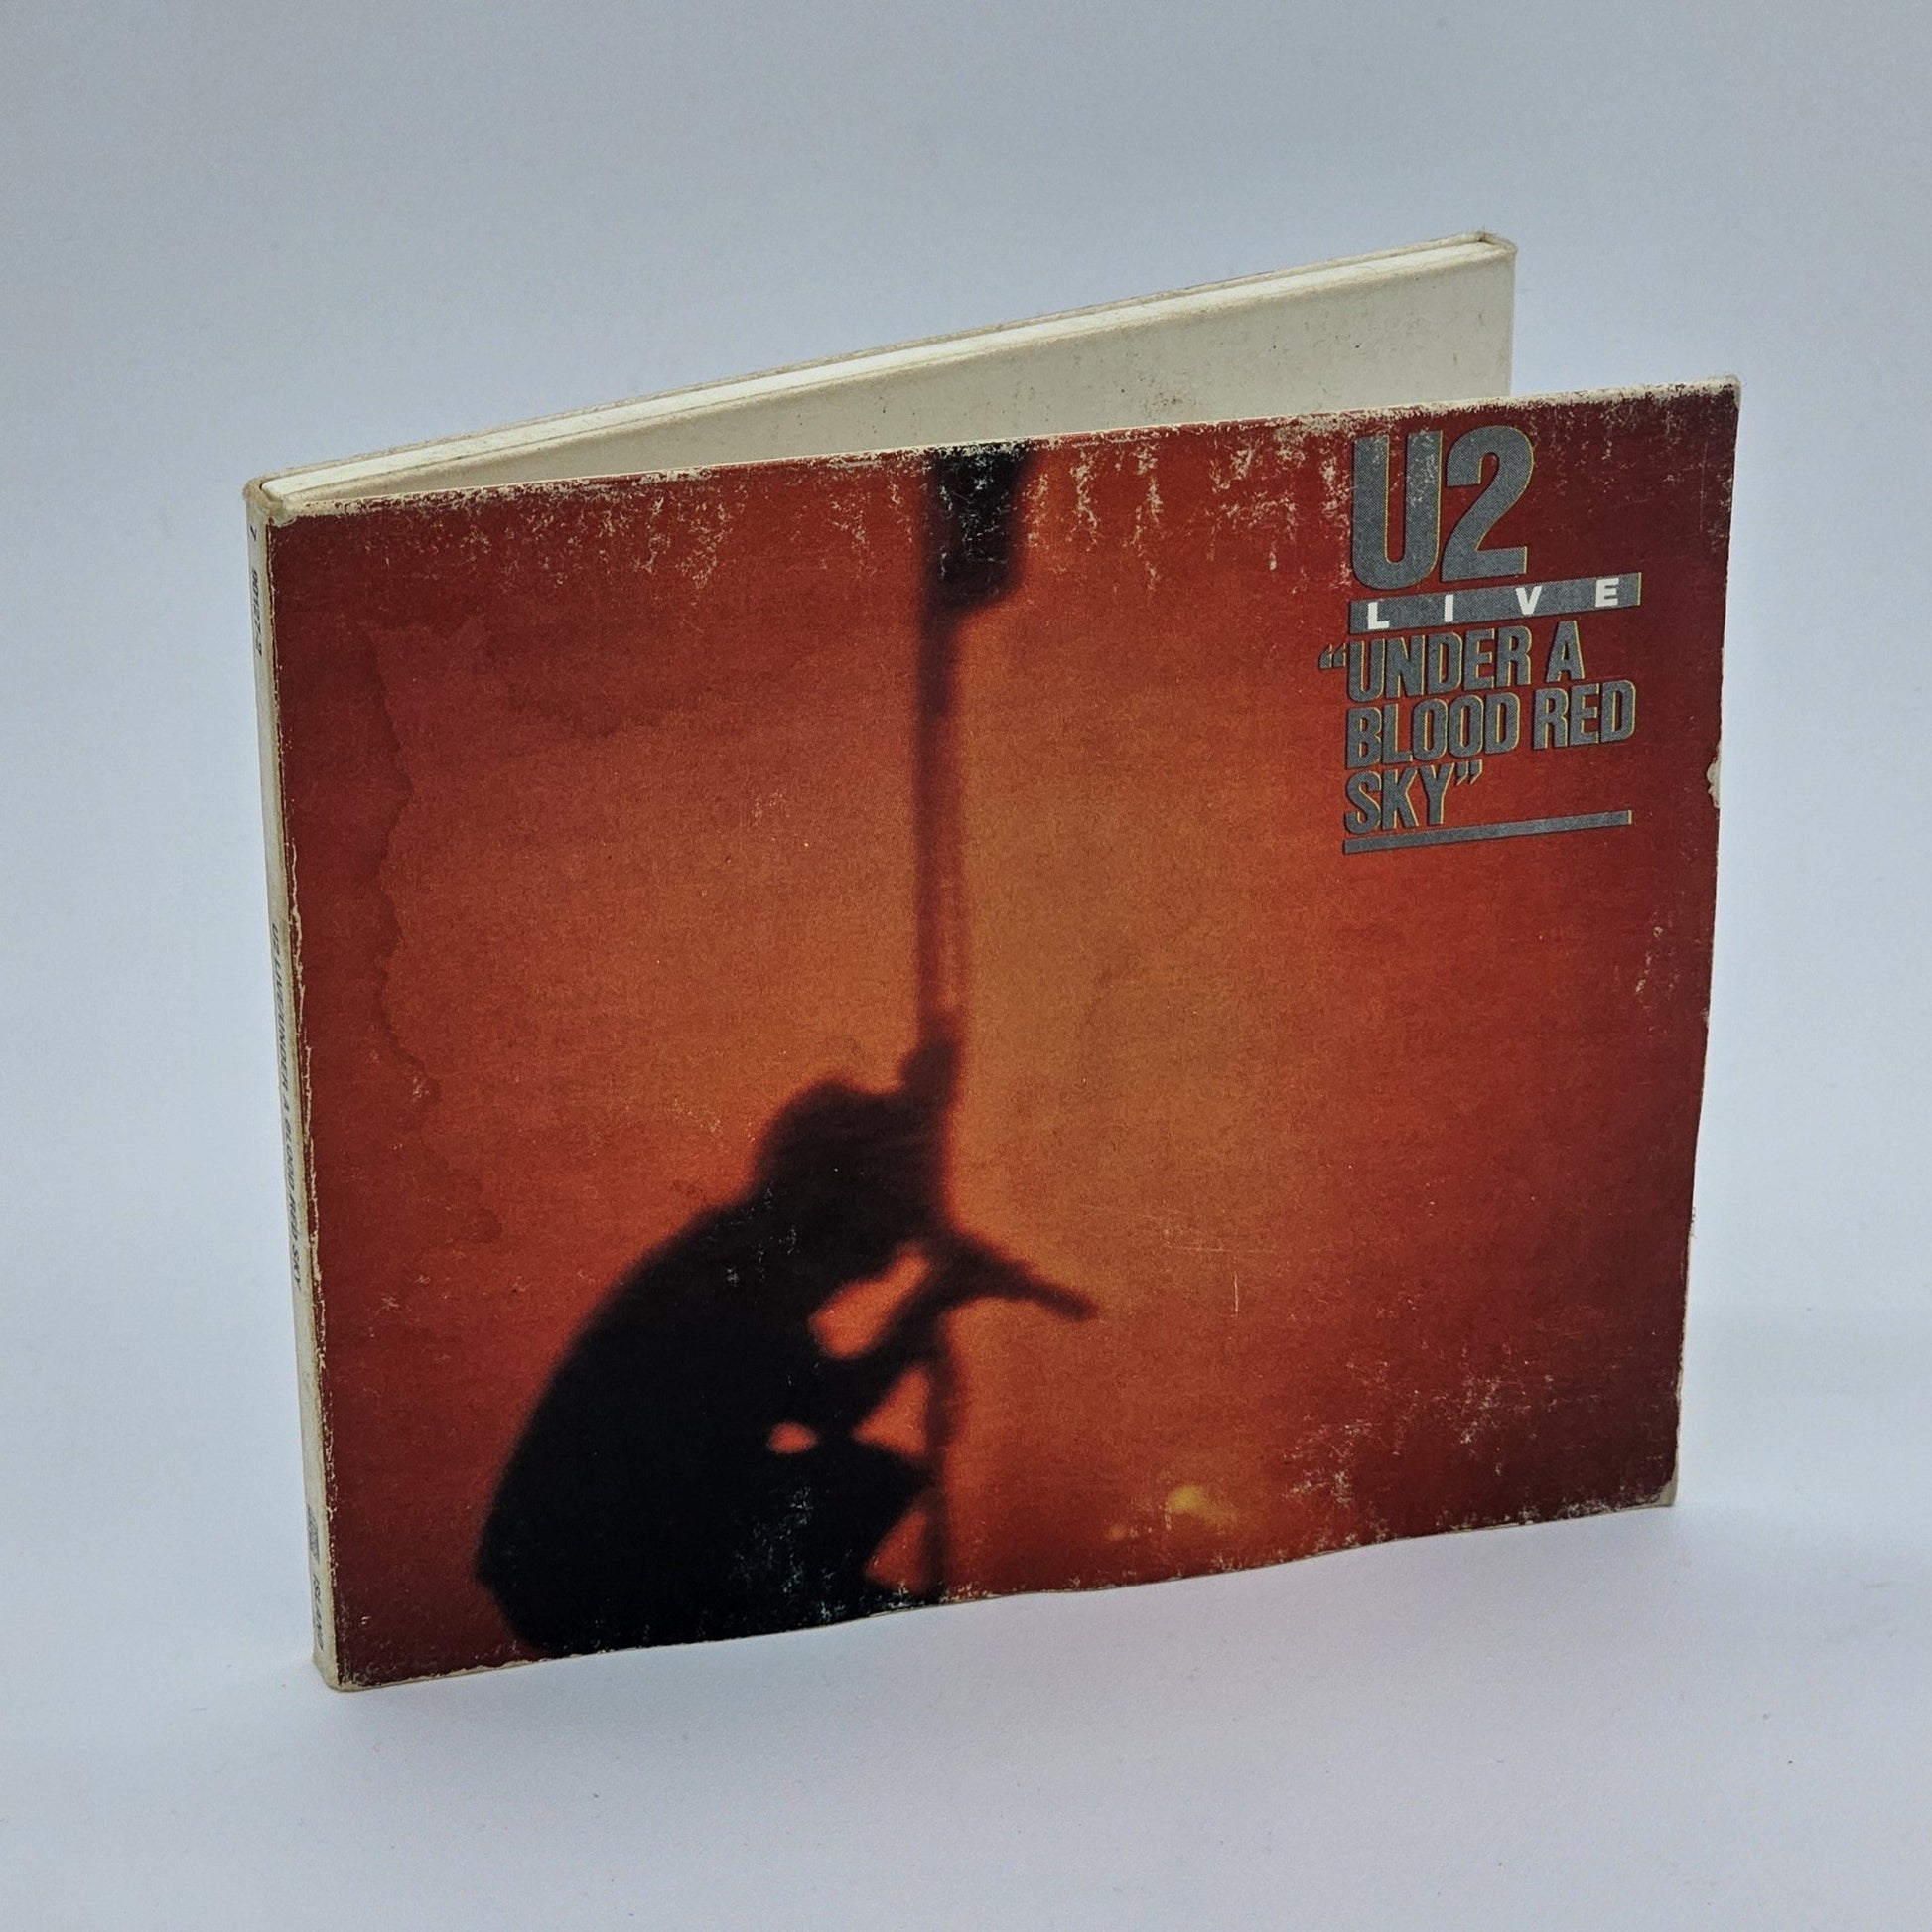 Island Records - U2 | Under A Blood Red Sky | CD - Compact Disc - Steady Bunny Shop